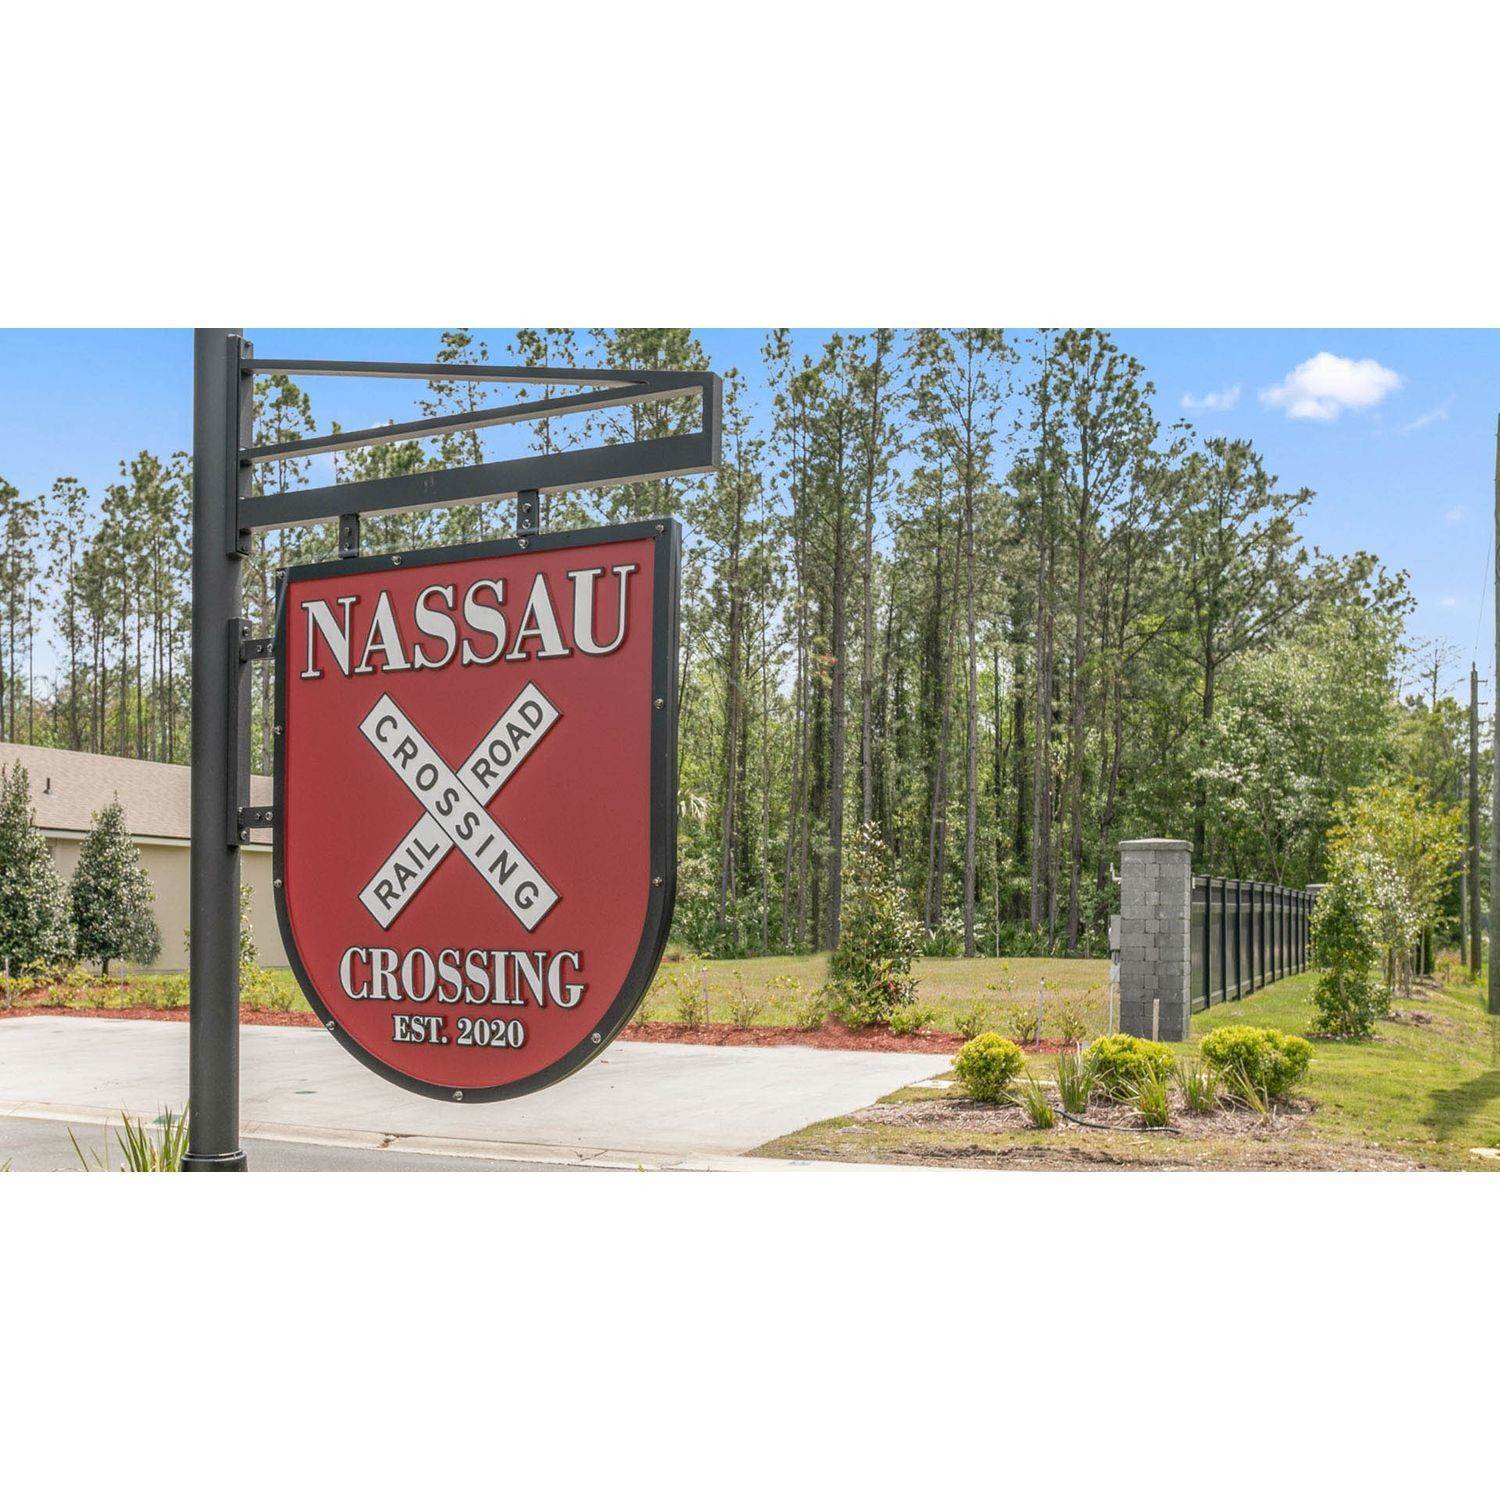 Nassau Crossing Townhomes building at 86400 Mainline Rd., Yulee, FL 32097